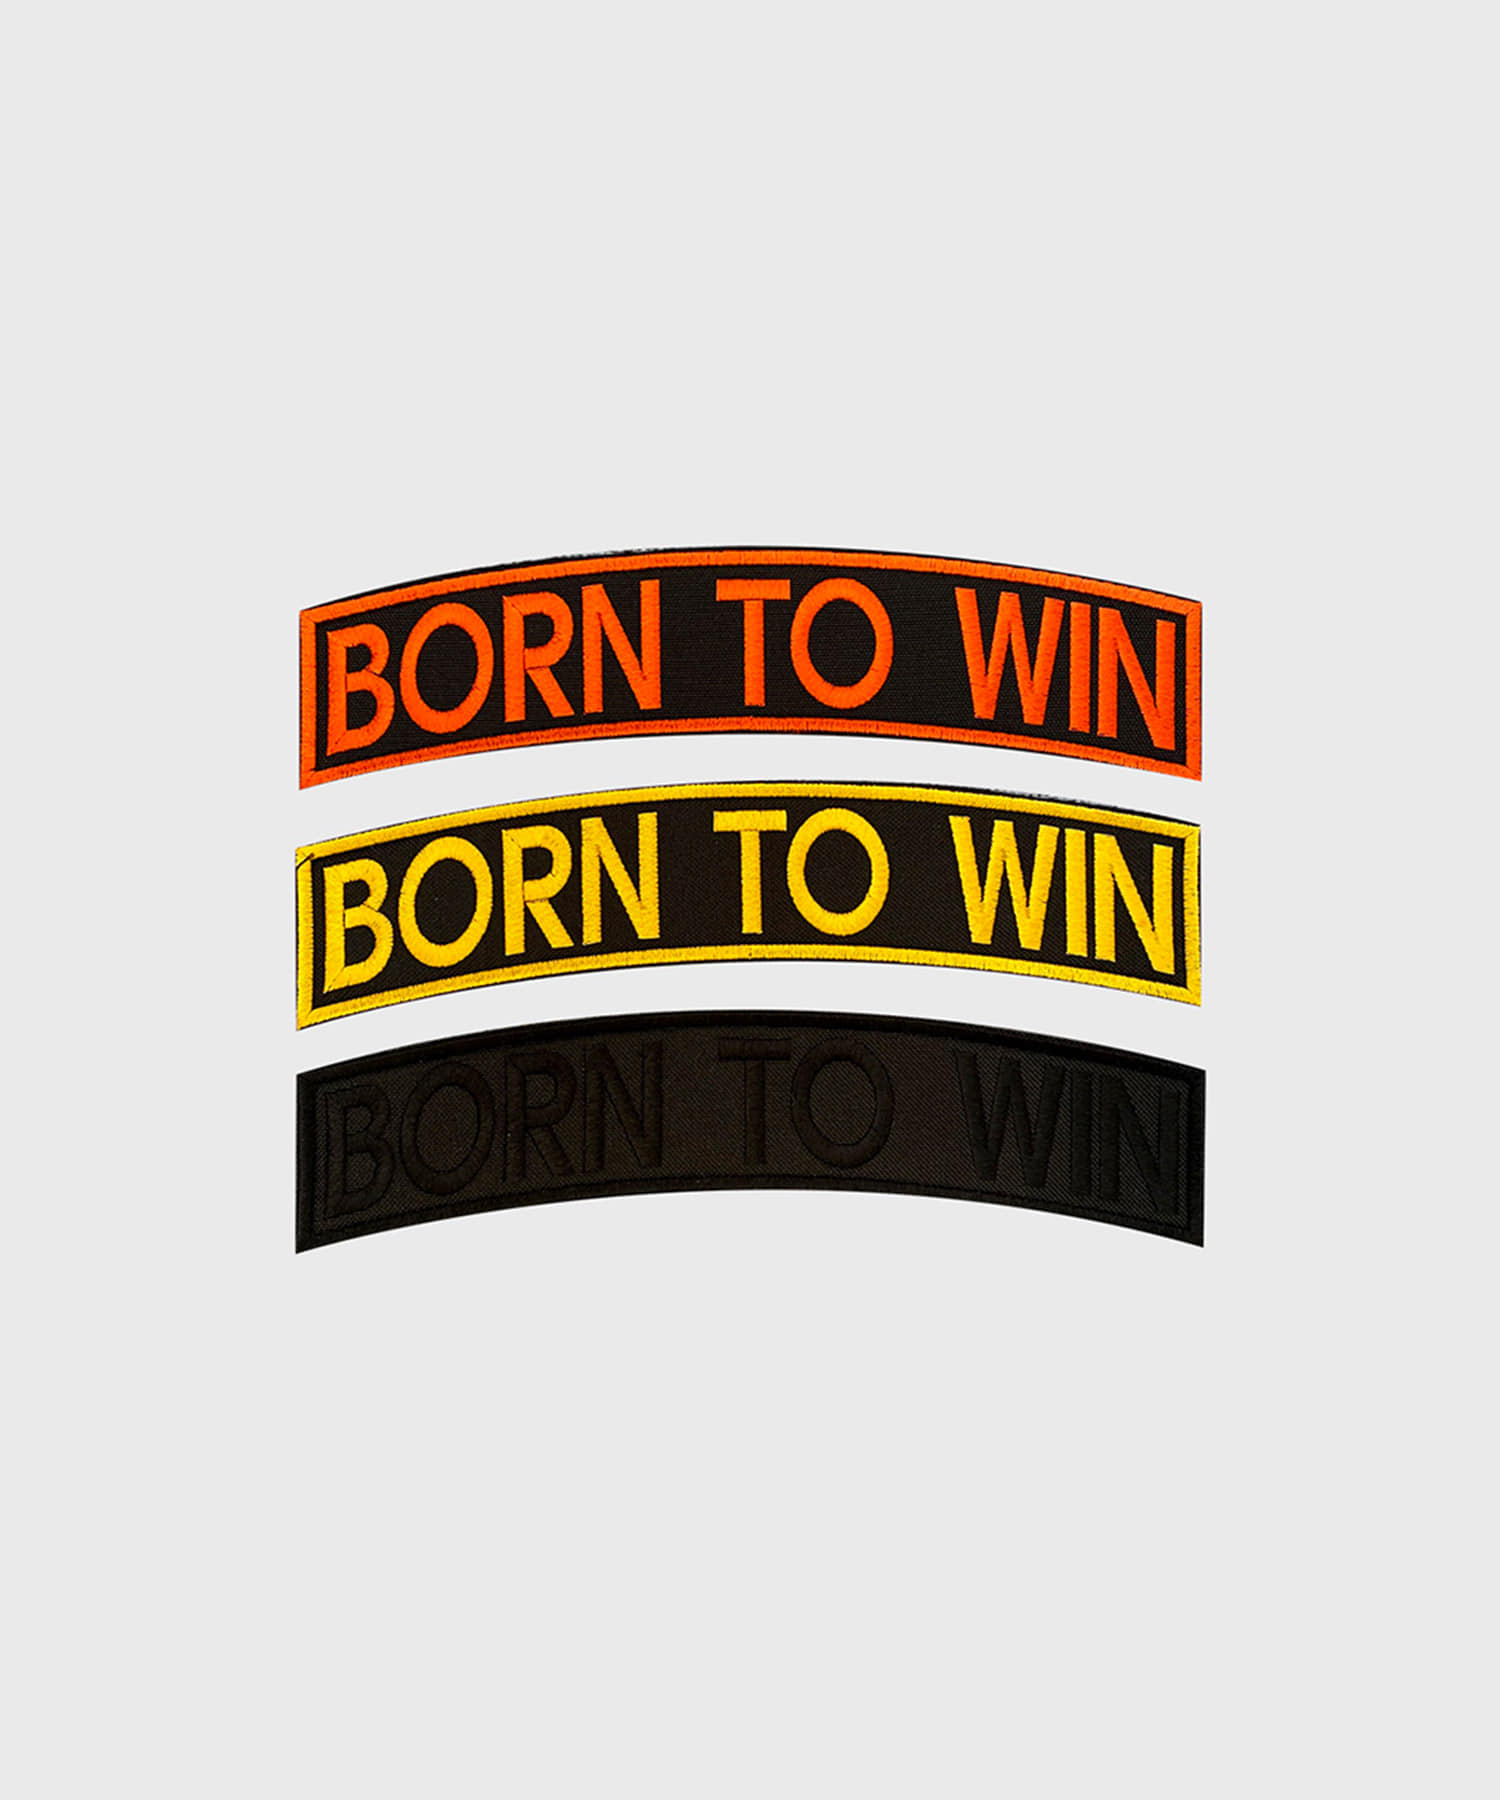 BORN TO WIN BIG PATCH